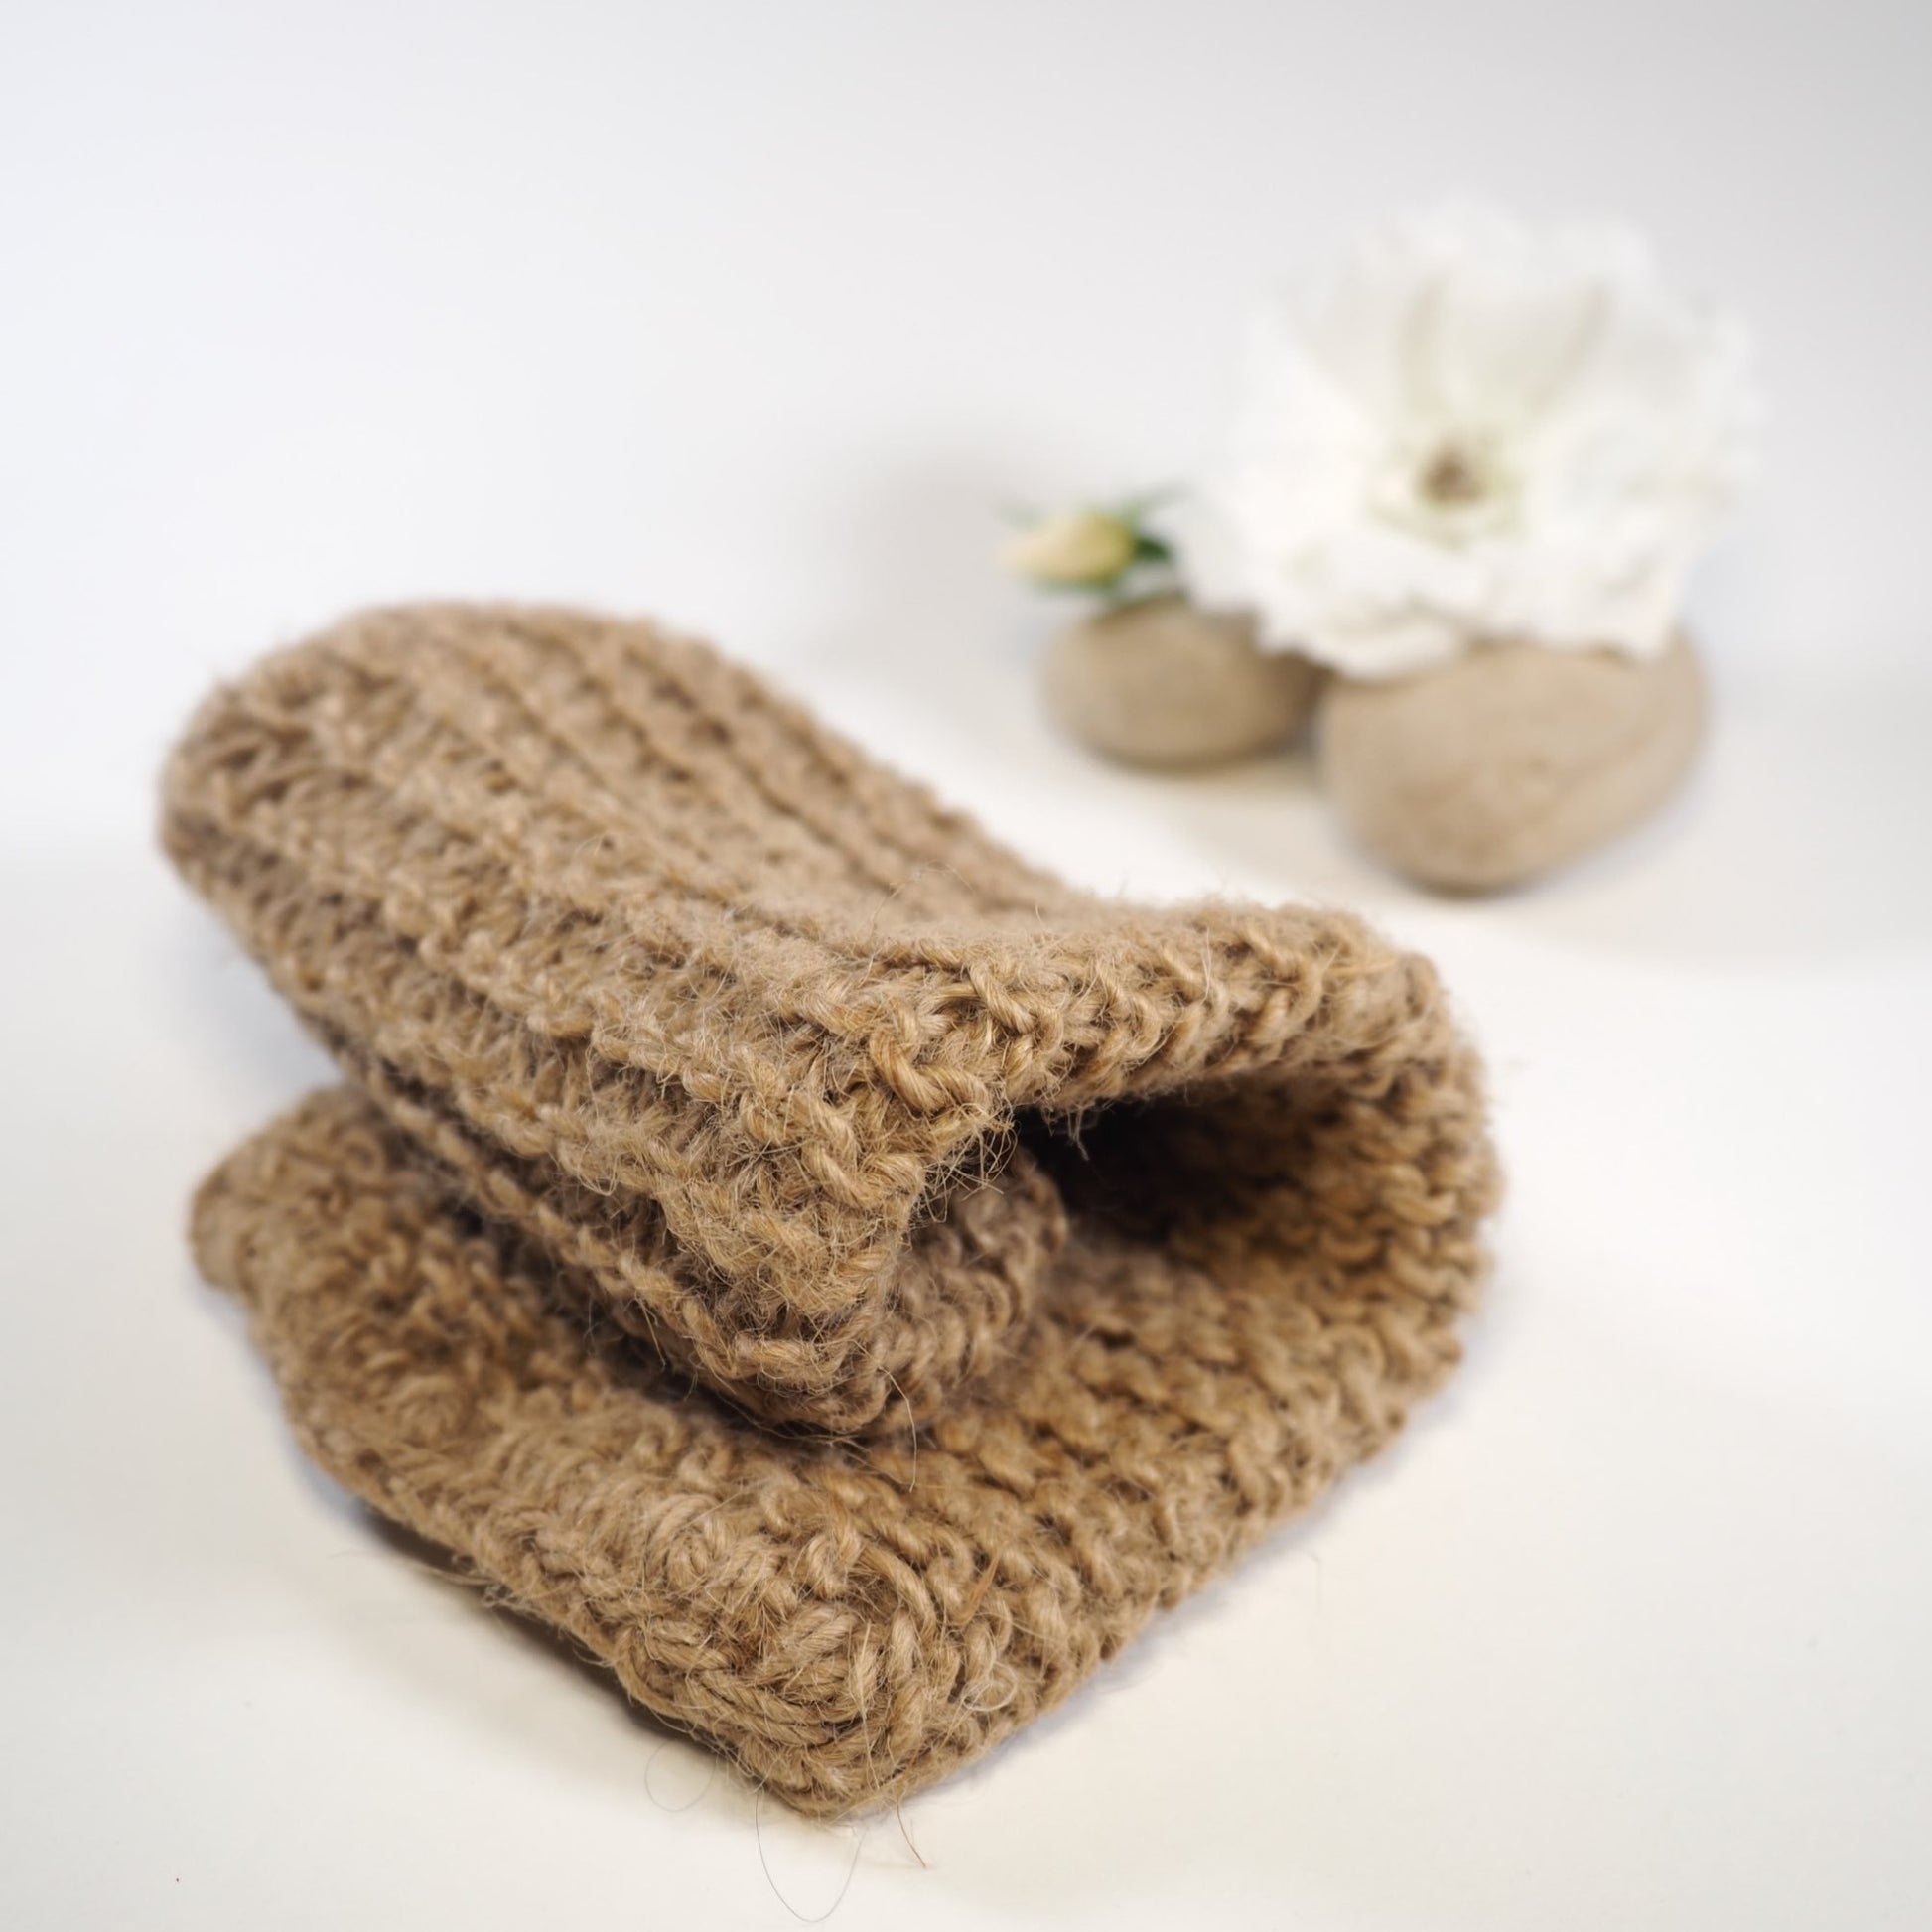 Hand crocheted jute mitt folded over with rock and rose